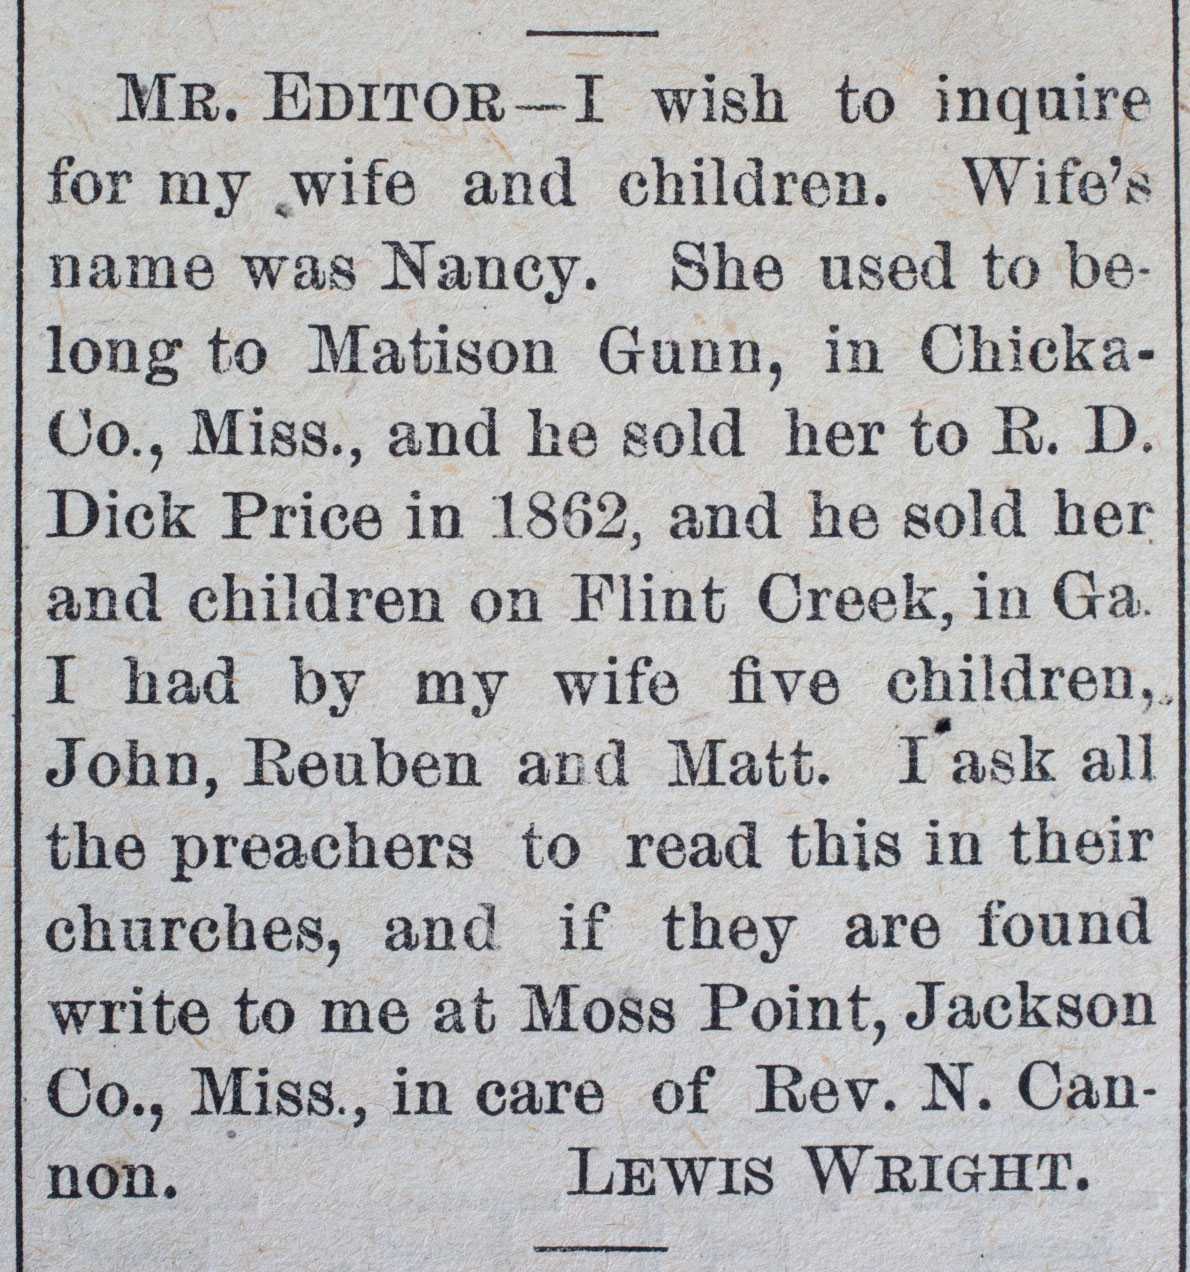 A classified ad in the newspaper of Lewis Wright searching for his wife and children.